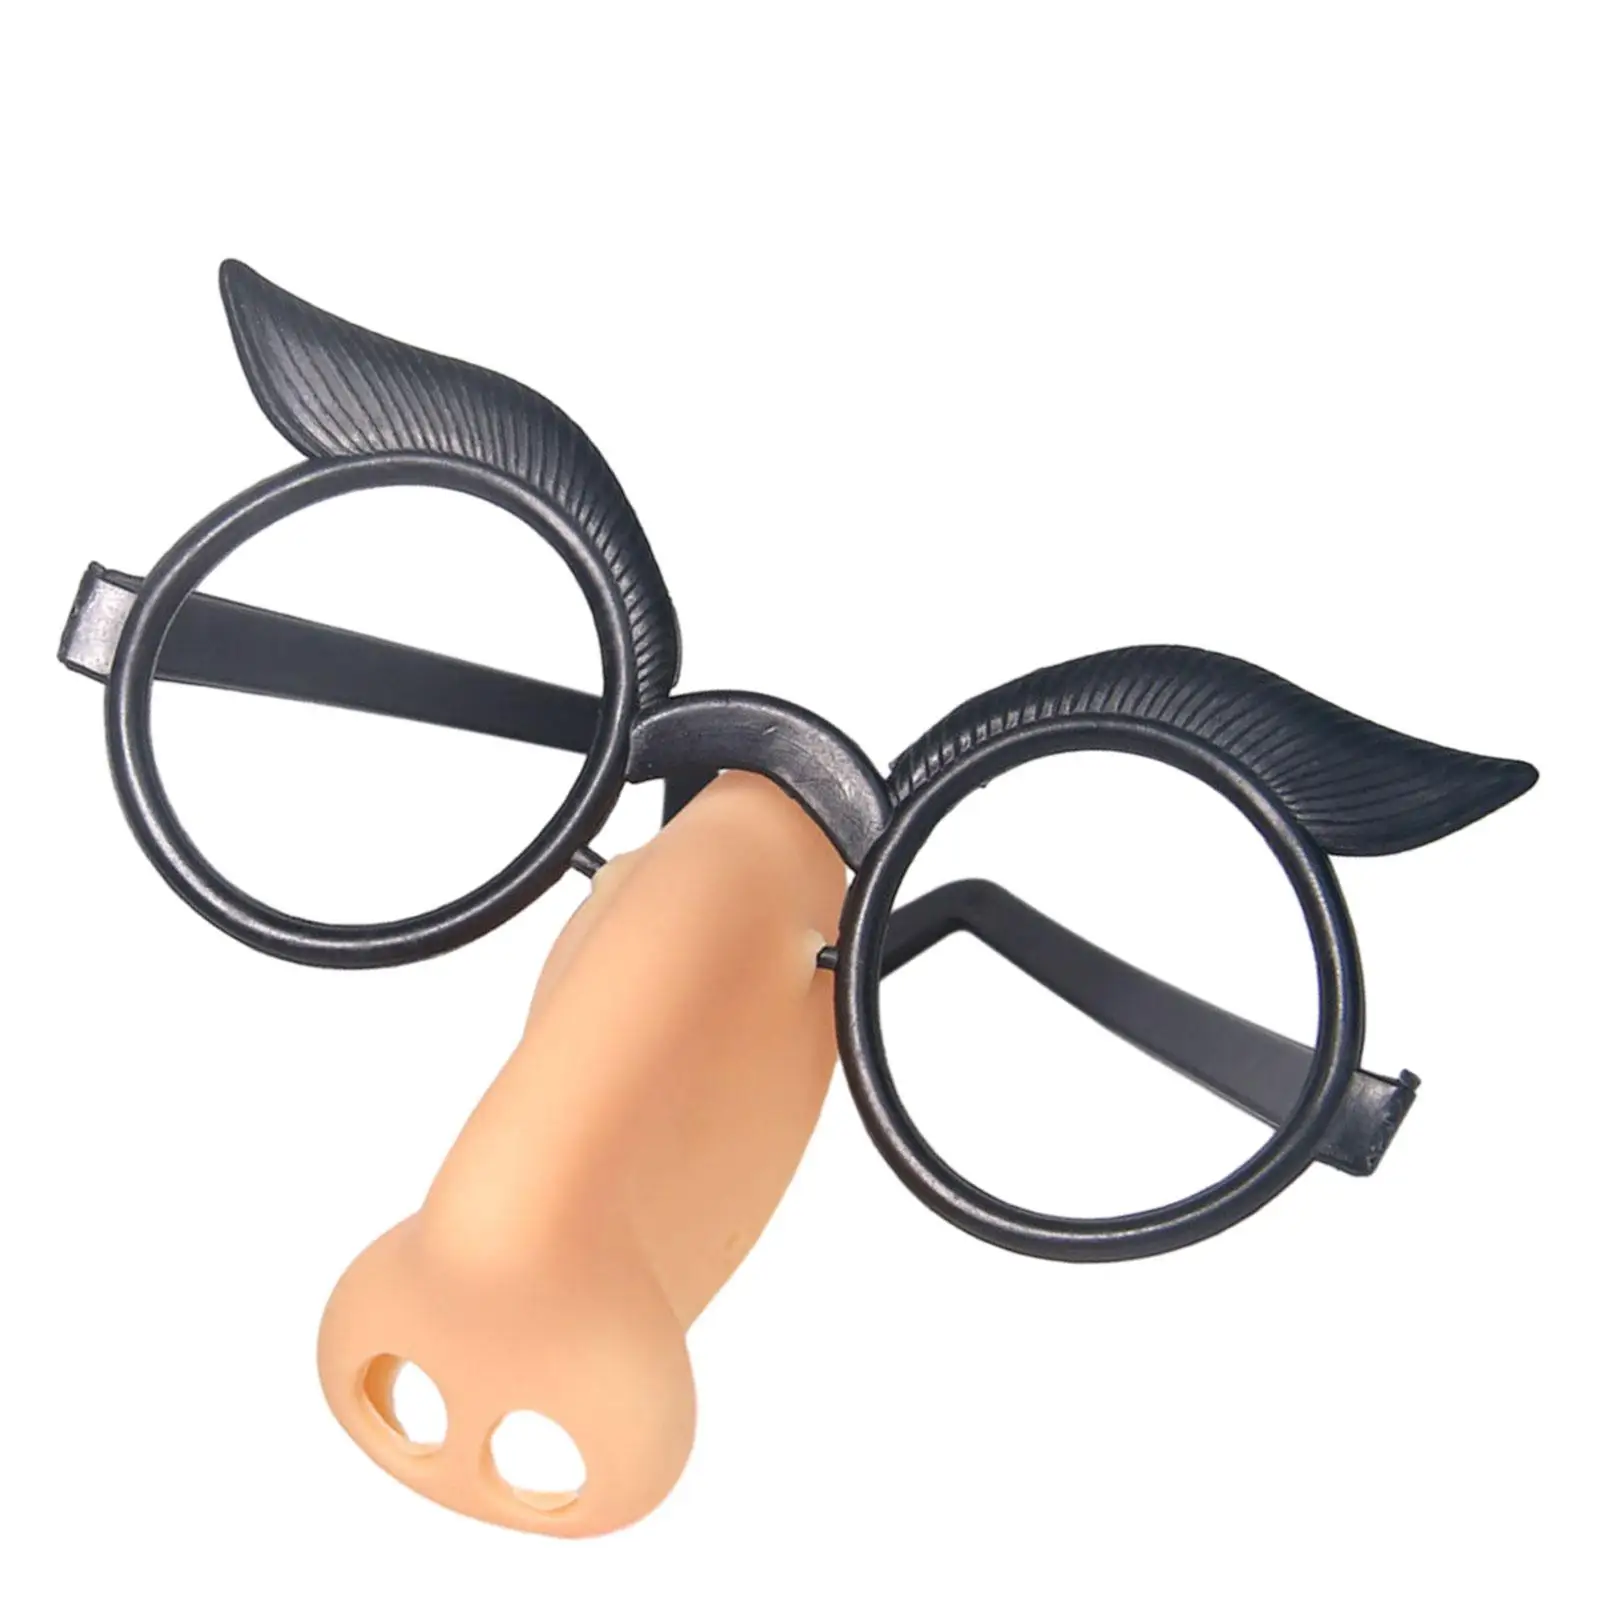 Witch Nose with Glasses Women Glasses Eyewear Decorative Glasses for Masquerade Birthday Party Favors Halloween Decoration